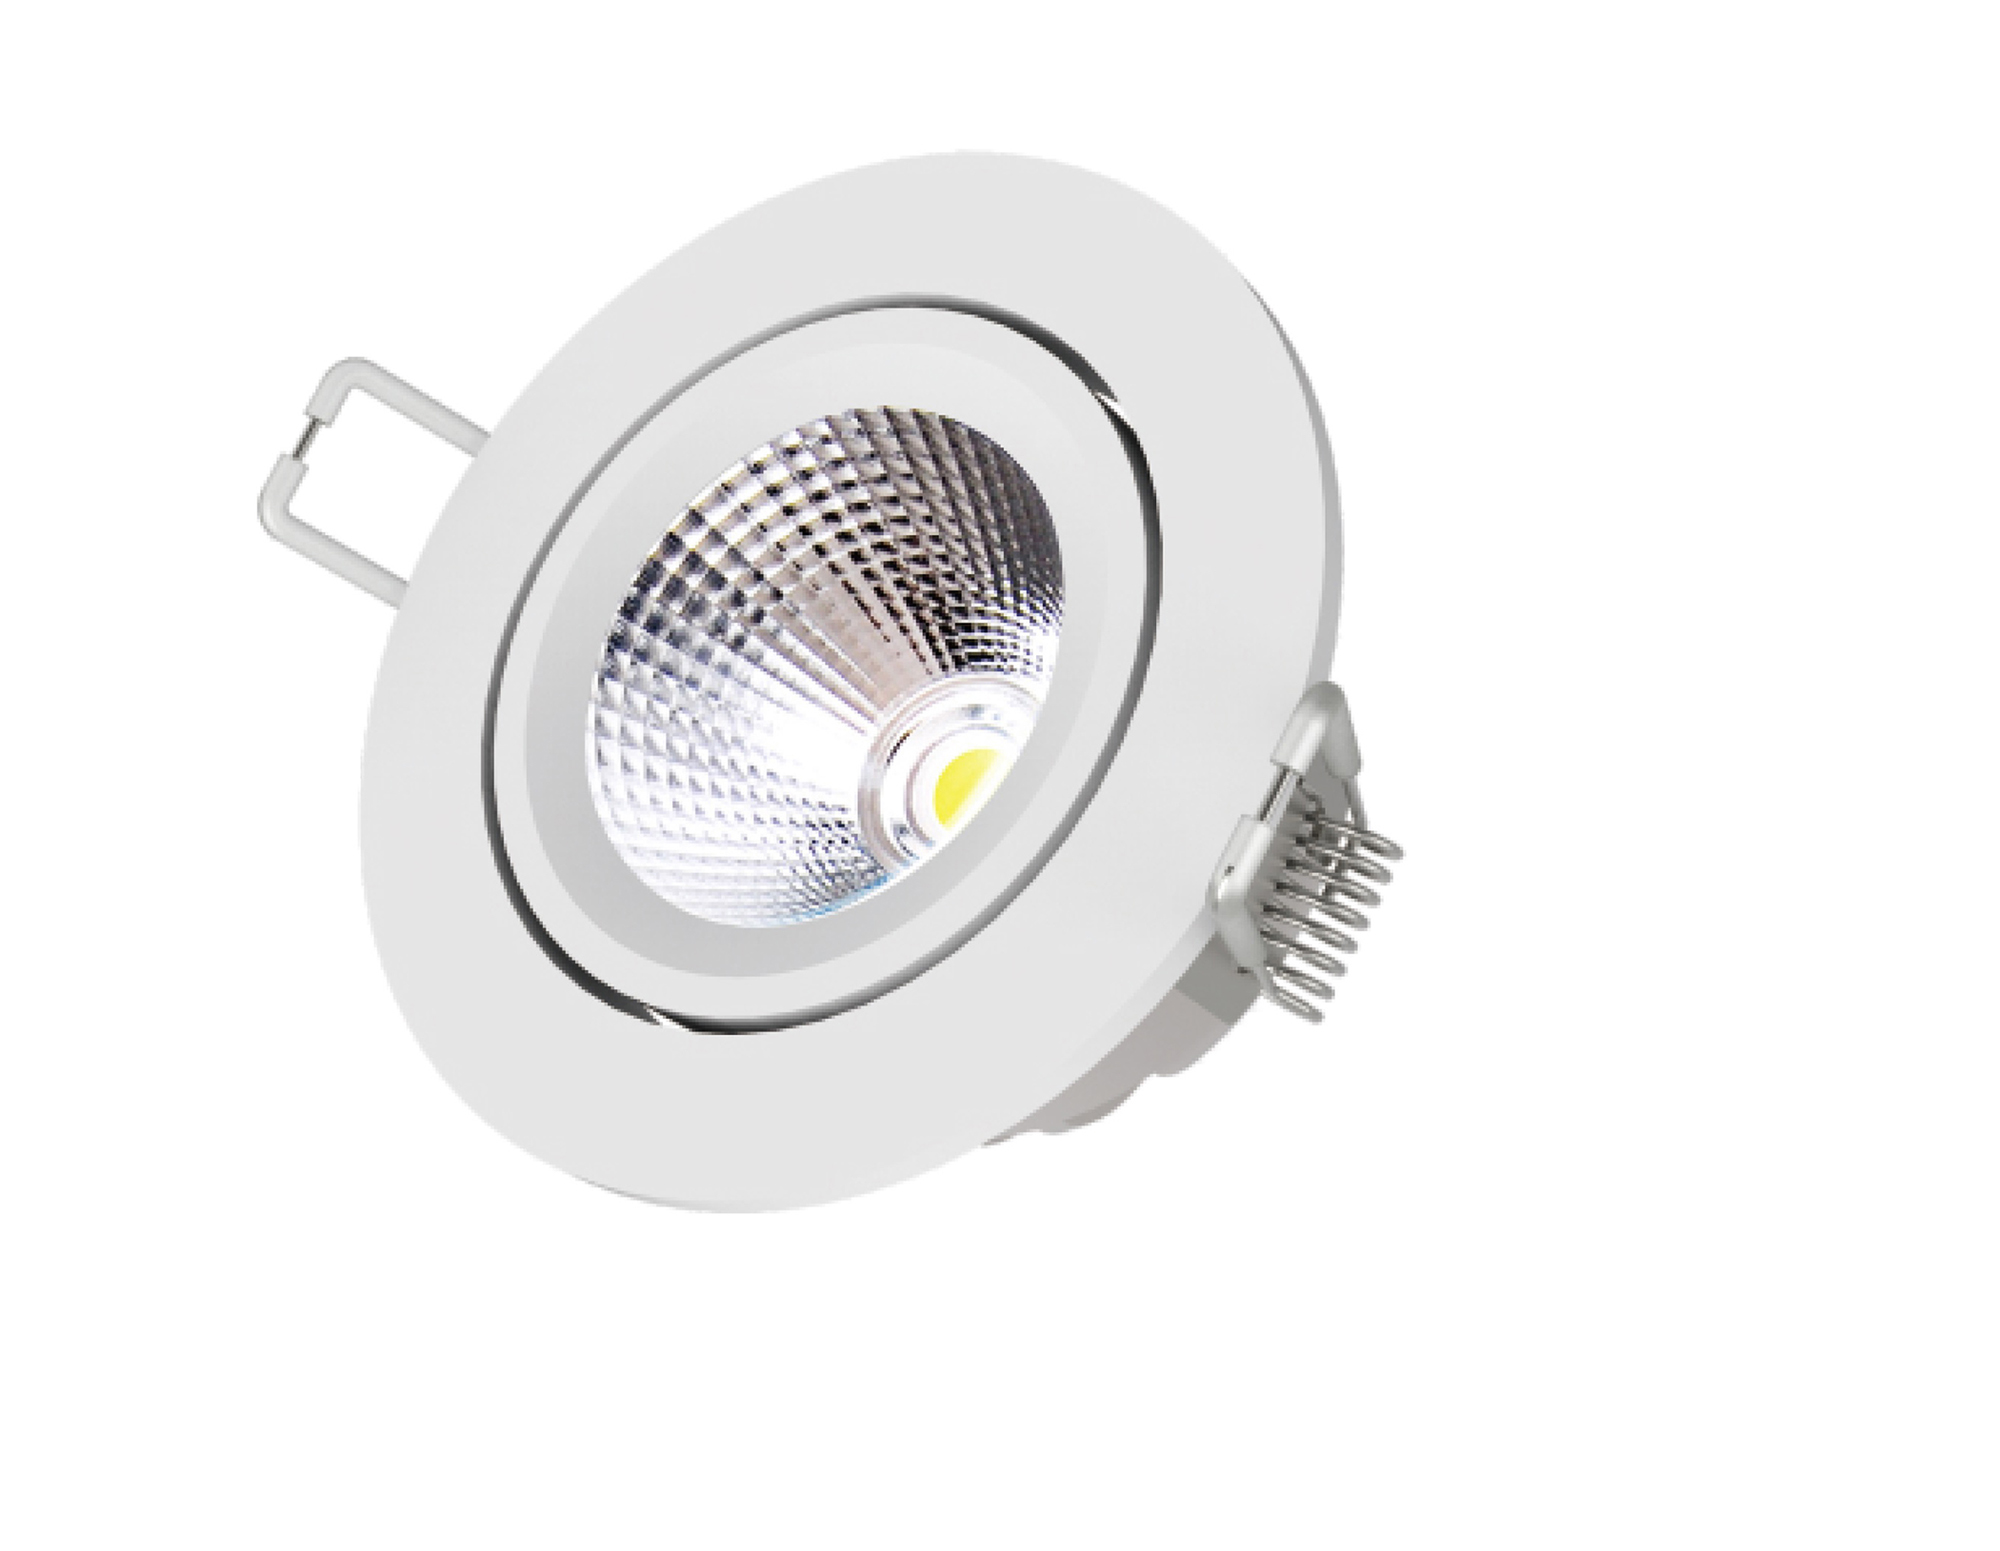 SD-12R-Y  Smart Spot light; RF 2.4GHz; 12W; Dimmable; 3000K; 24 degree beam angle; 200-240Vac; F95mm cut-out; IP20.